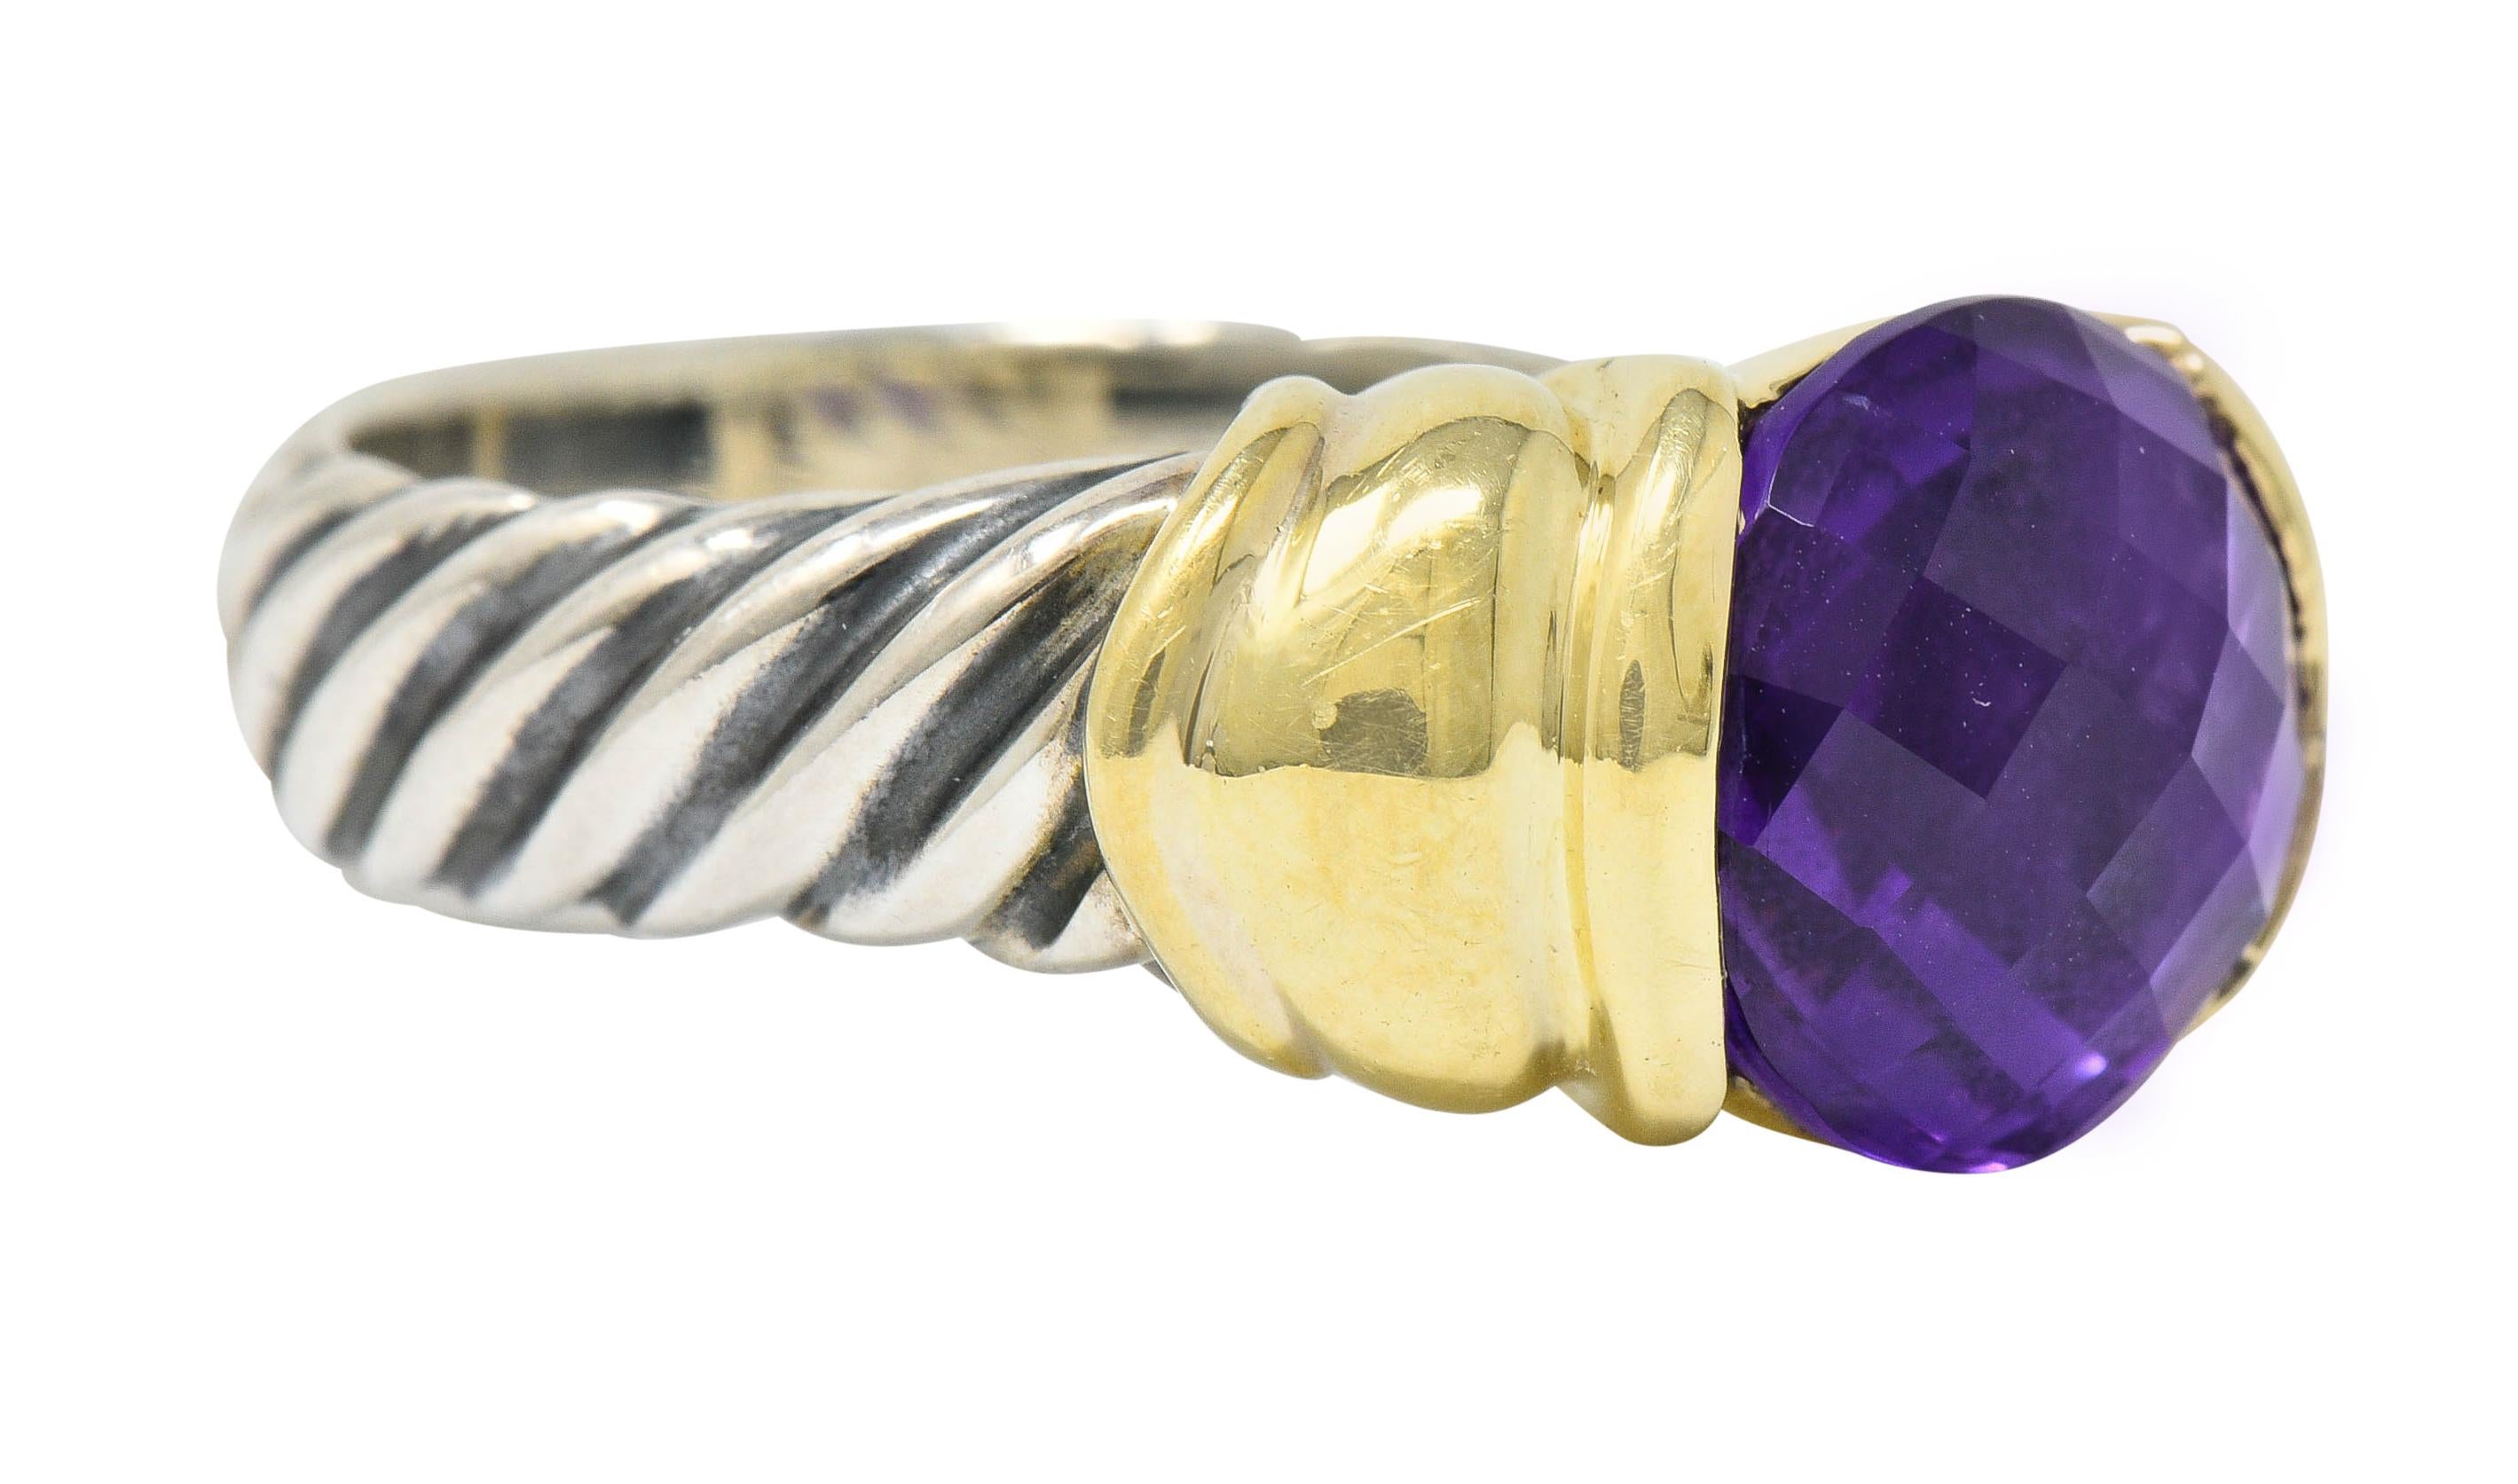 Centering a 10.0 mm round mixed cut amethyst; transparent and deeply purple

Half bezel set in polished gold with matching stylized shoulders

Completed by classic silver twisted cable shank

Signed D. Yurman

Stamped 585 and 925 for 14 karat gold